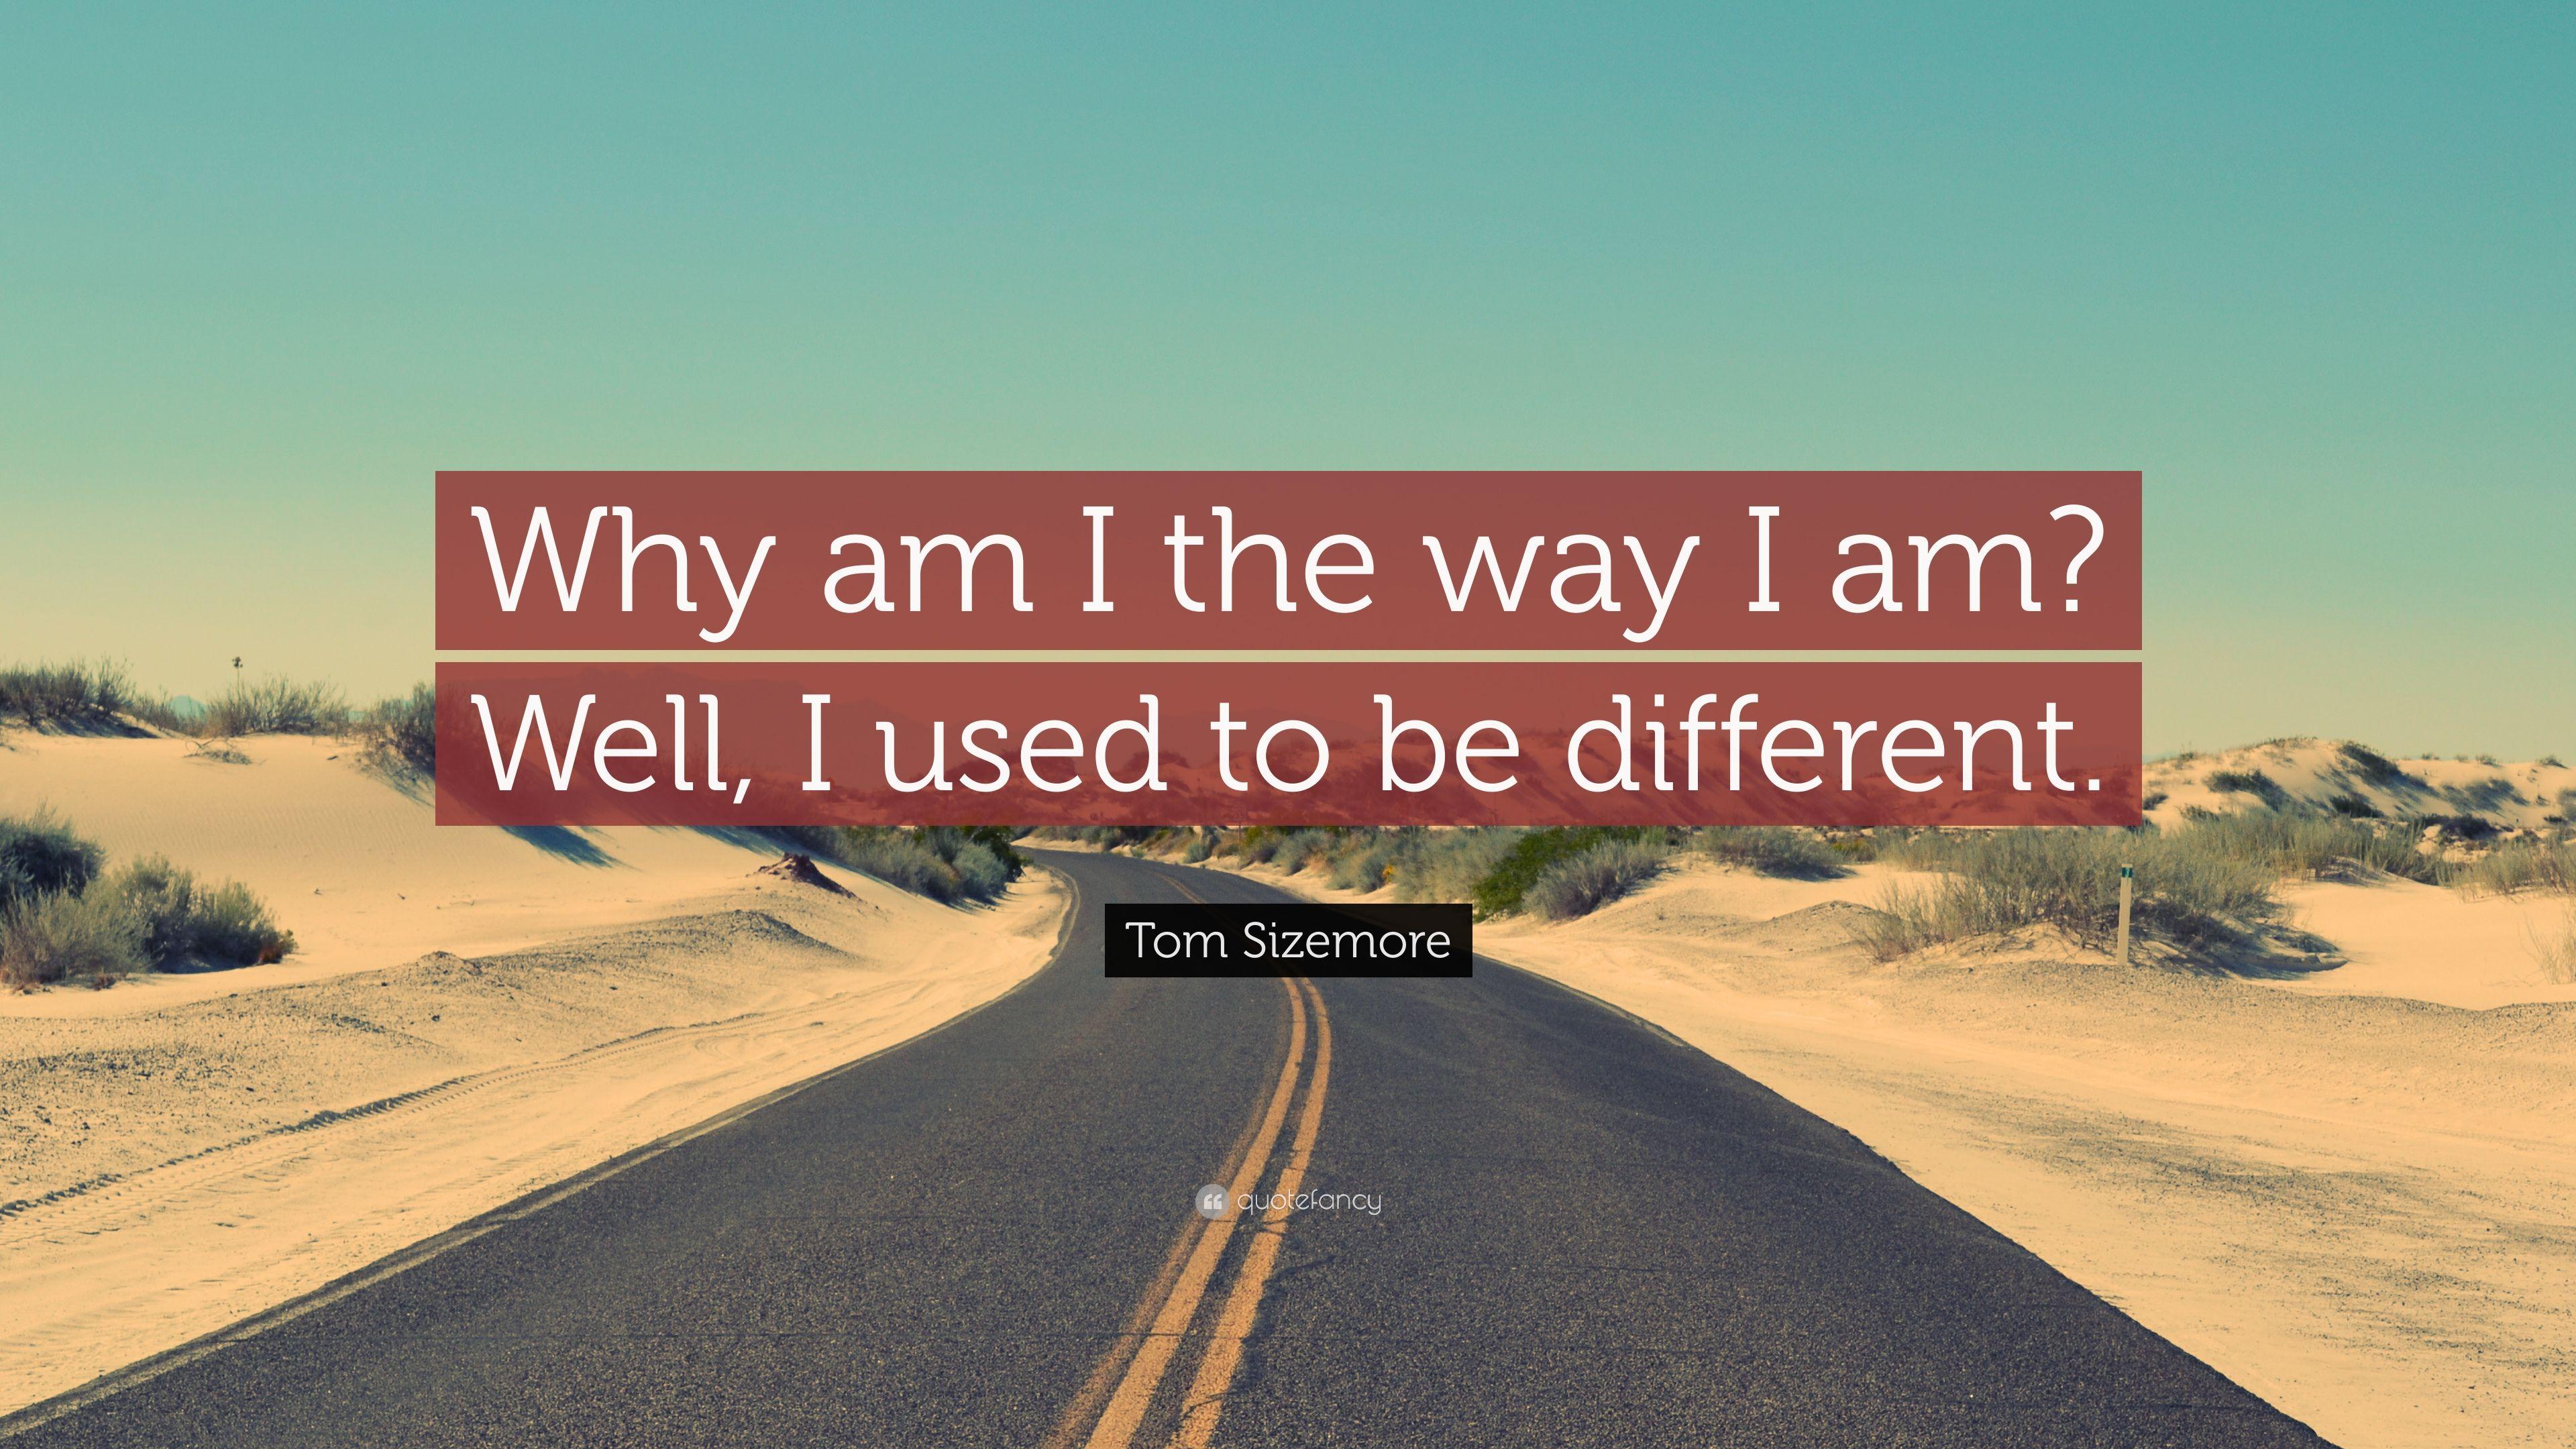 Tom Sizemore Quote: “Why am I the way I am? Well, I used to be